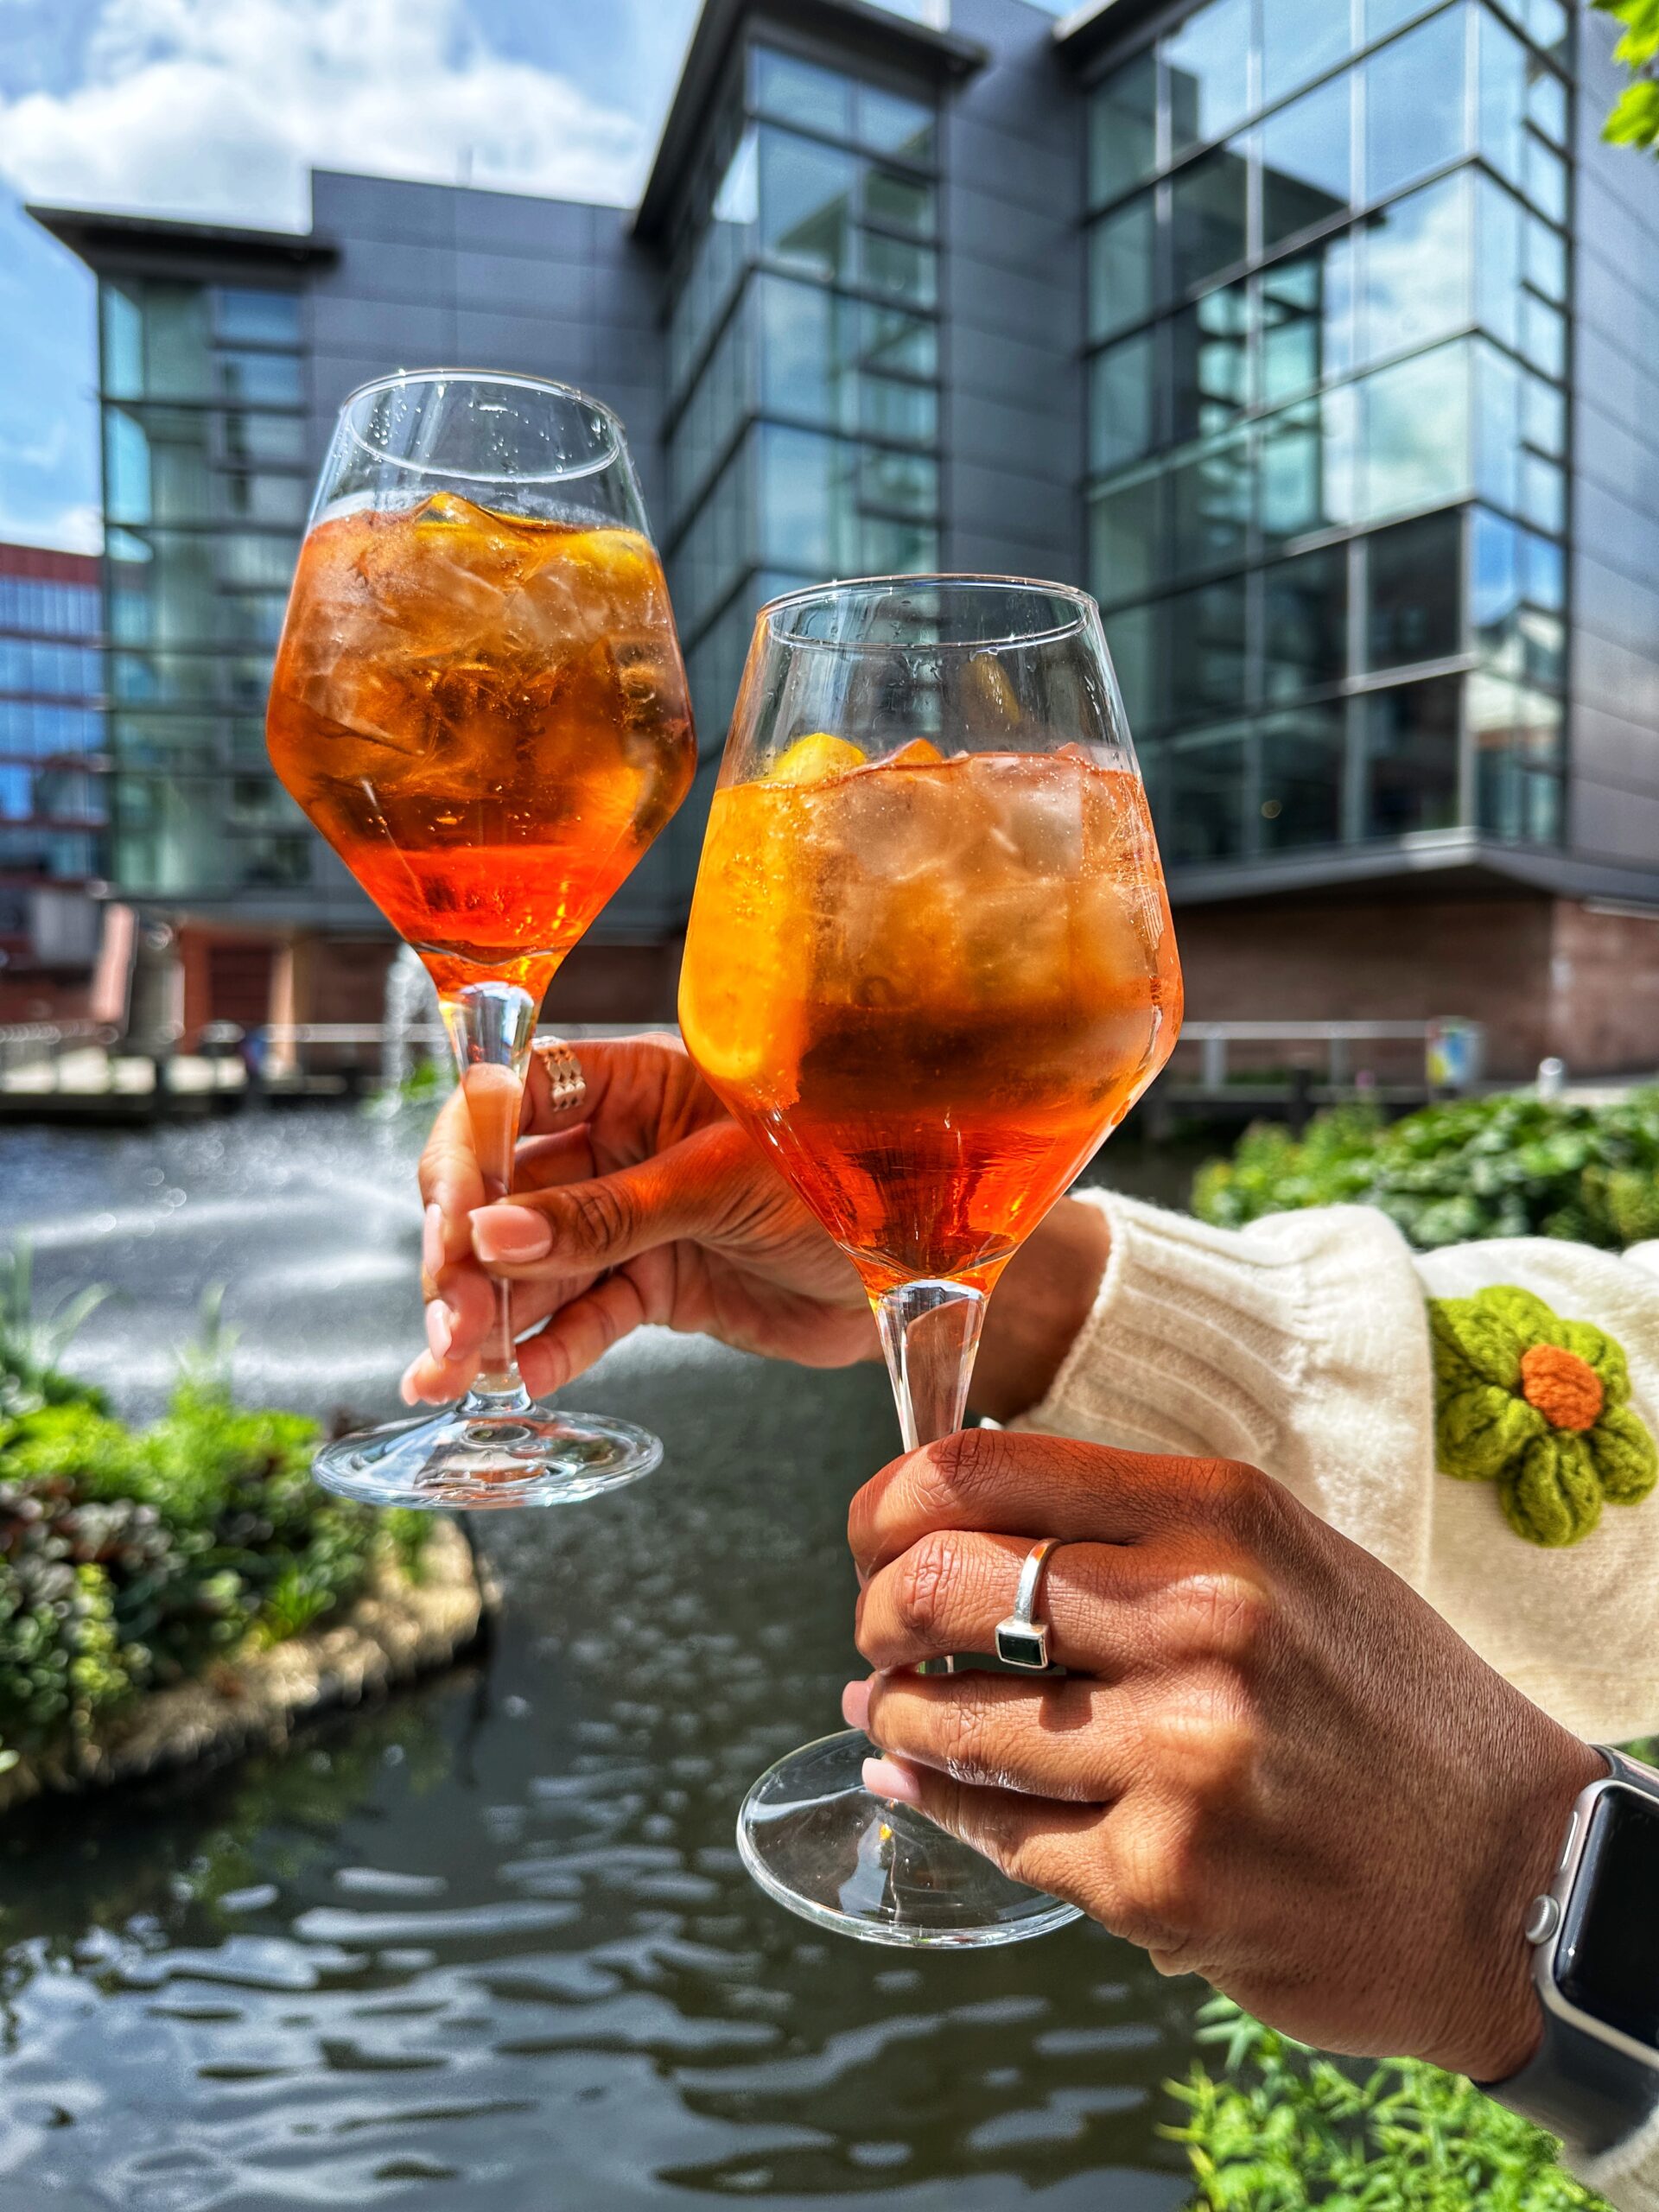 Manchester bar Society to give away FREE Aperol Spritzes to gig-goers